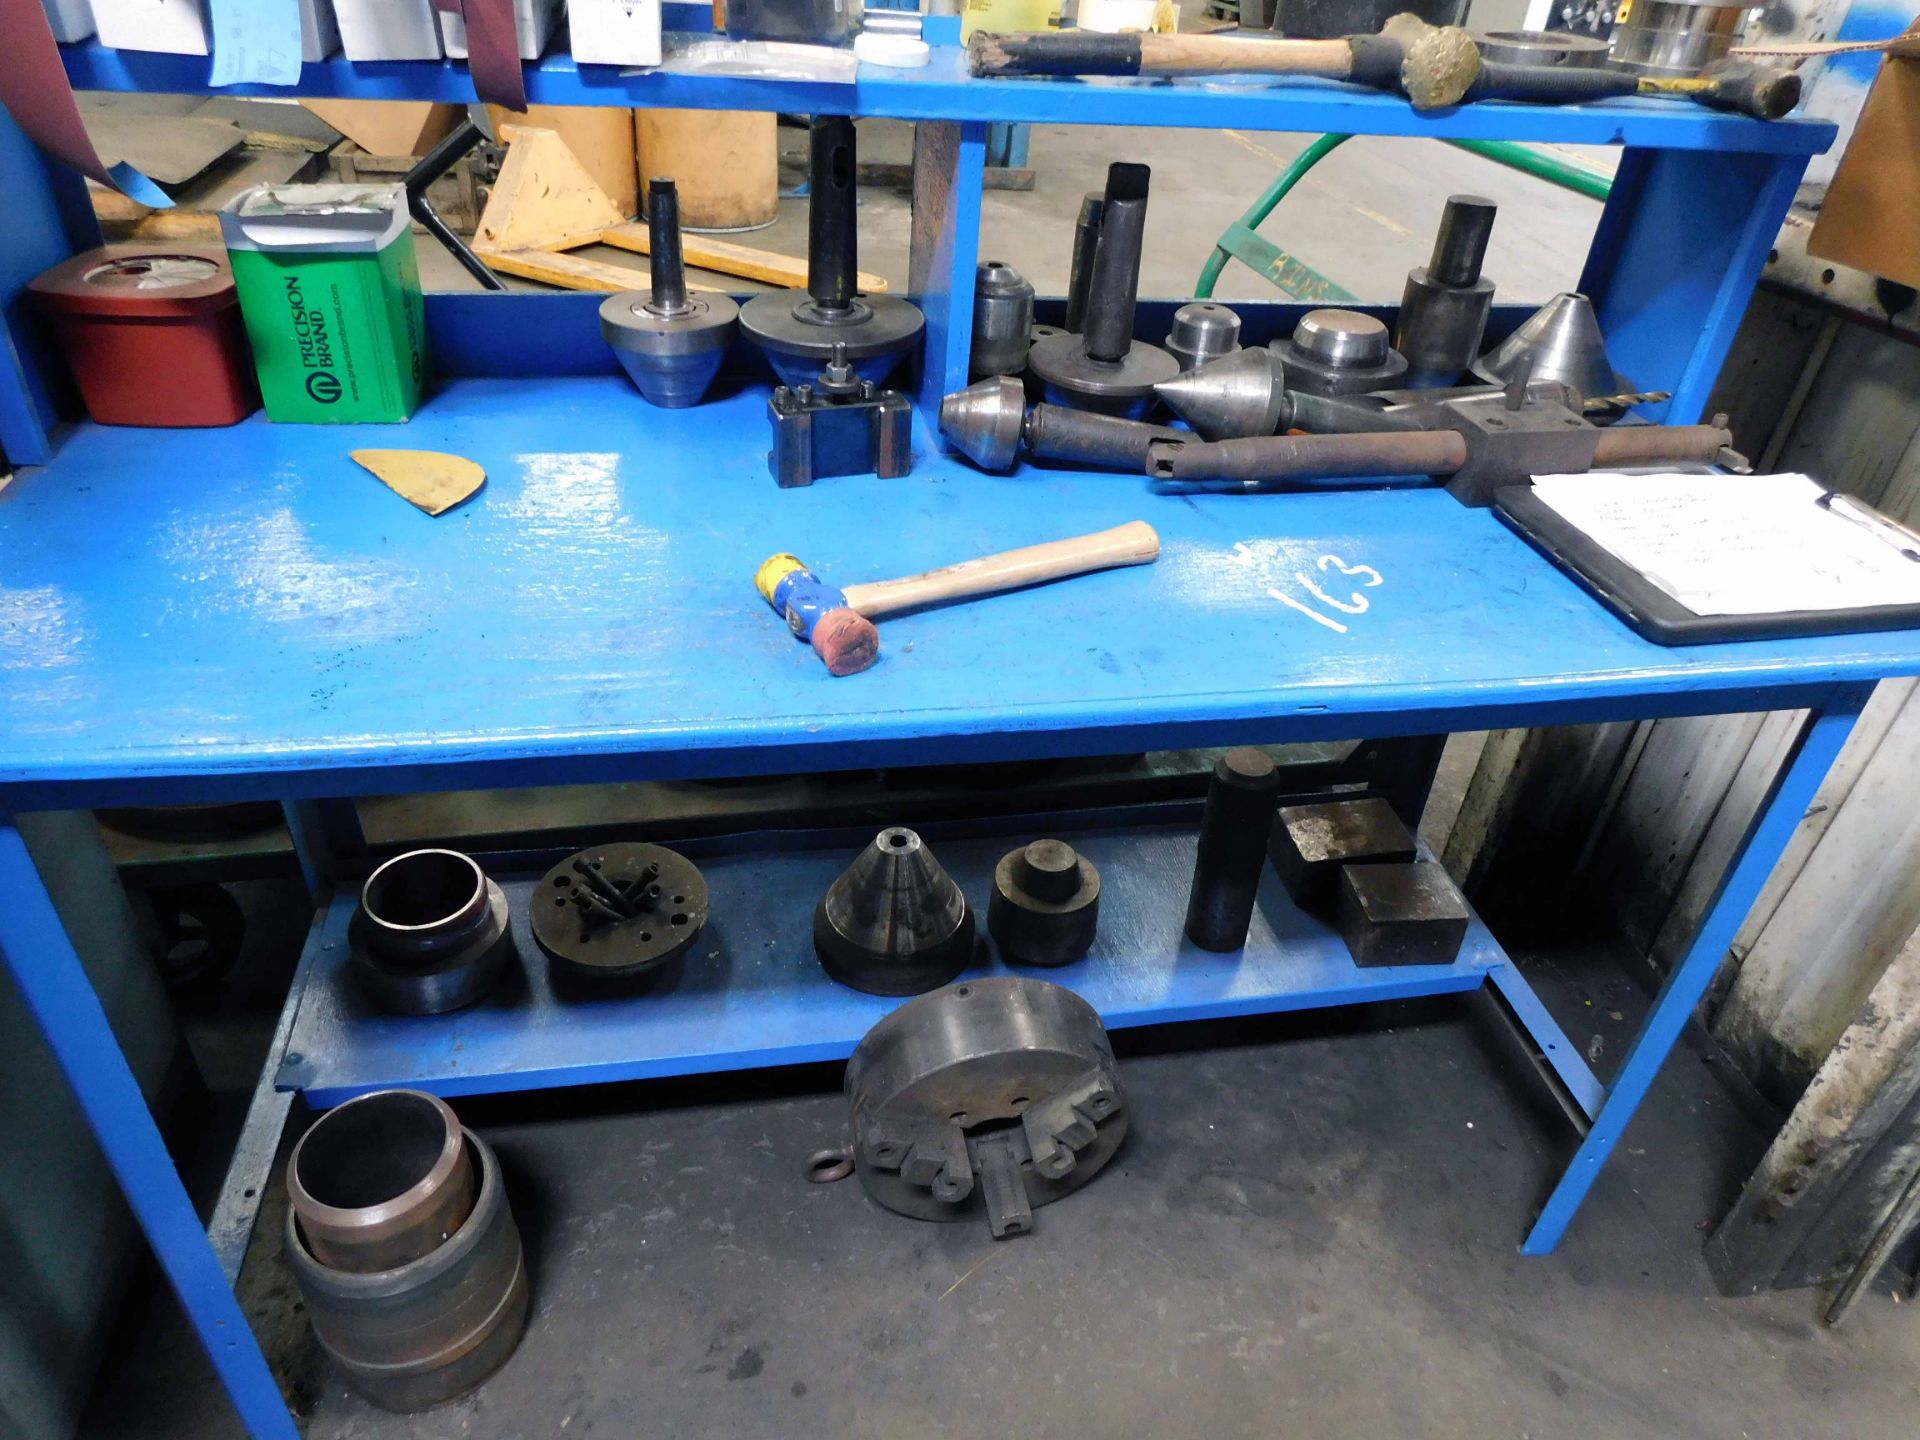 LOT CONSISTING OF: cabinet, bench, cart, lathe centers, toolholders & cutters